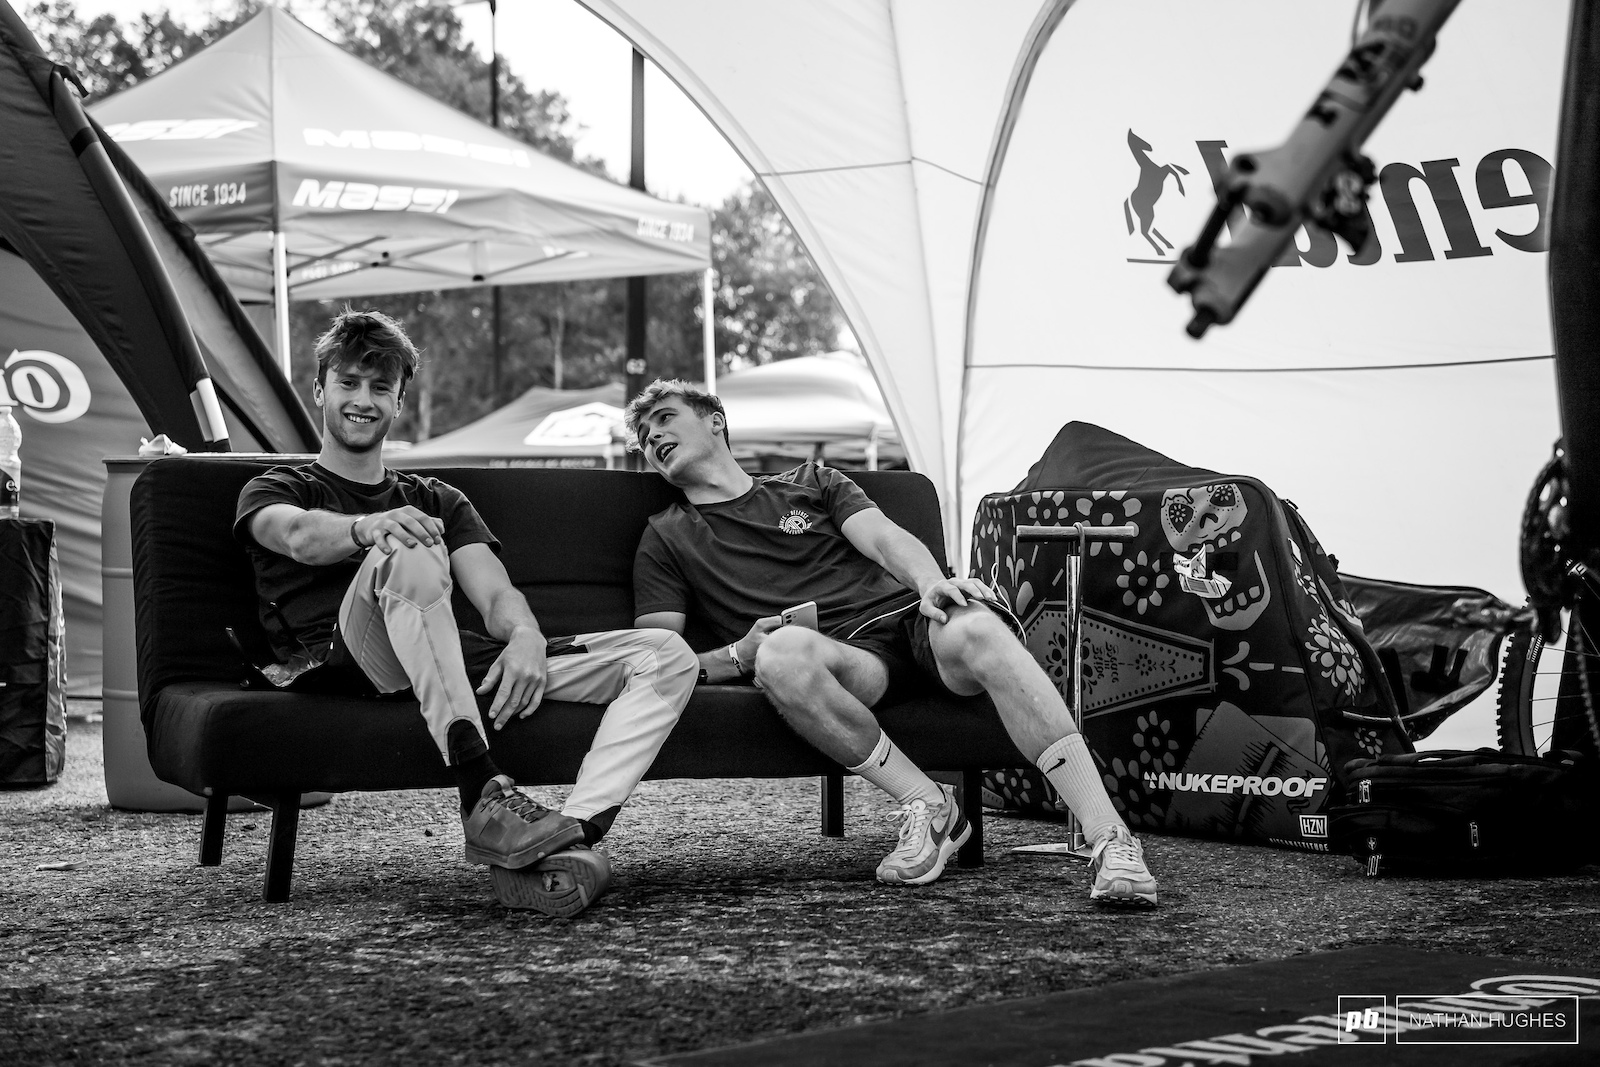 Continental Nukeproof team mates Ronan Dunne and Chris Cummings relaxing before Group A practice session.